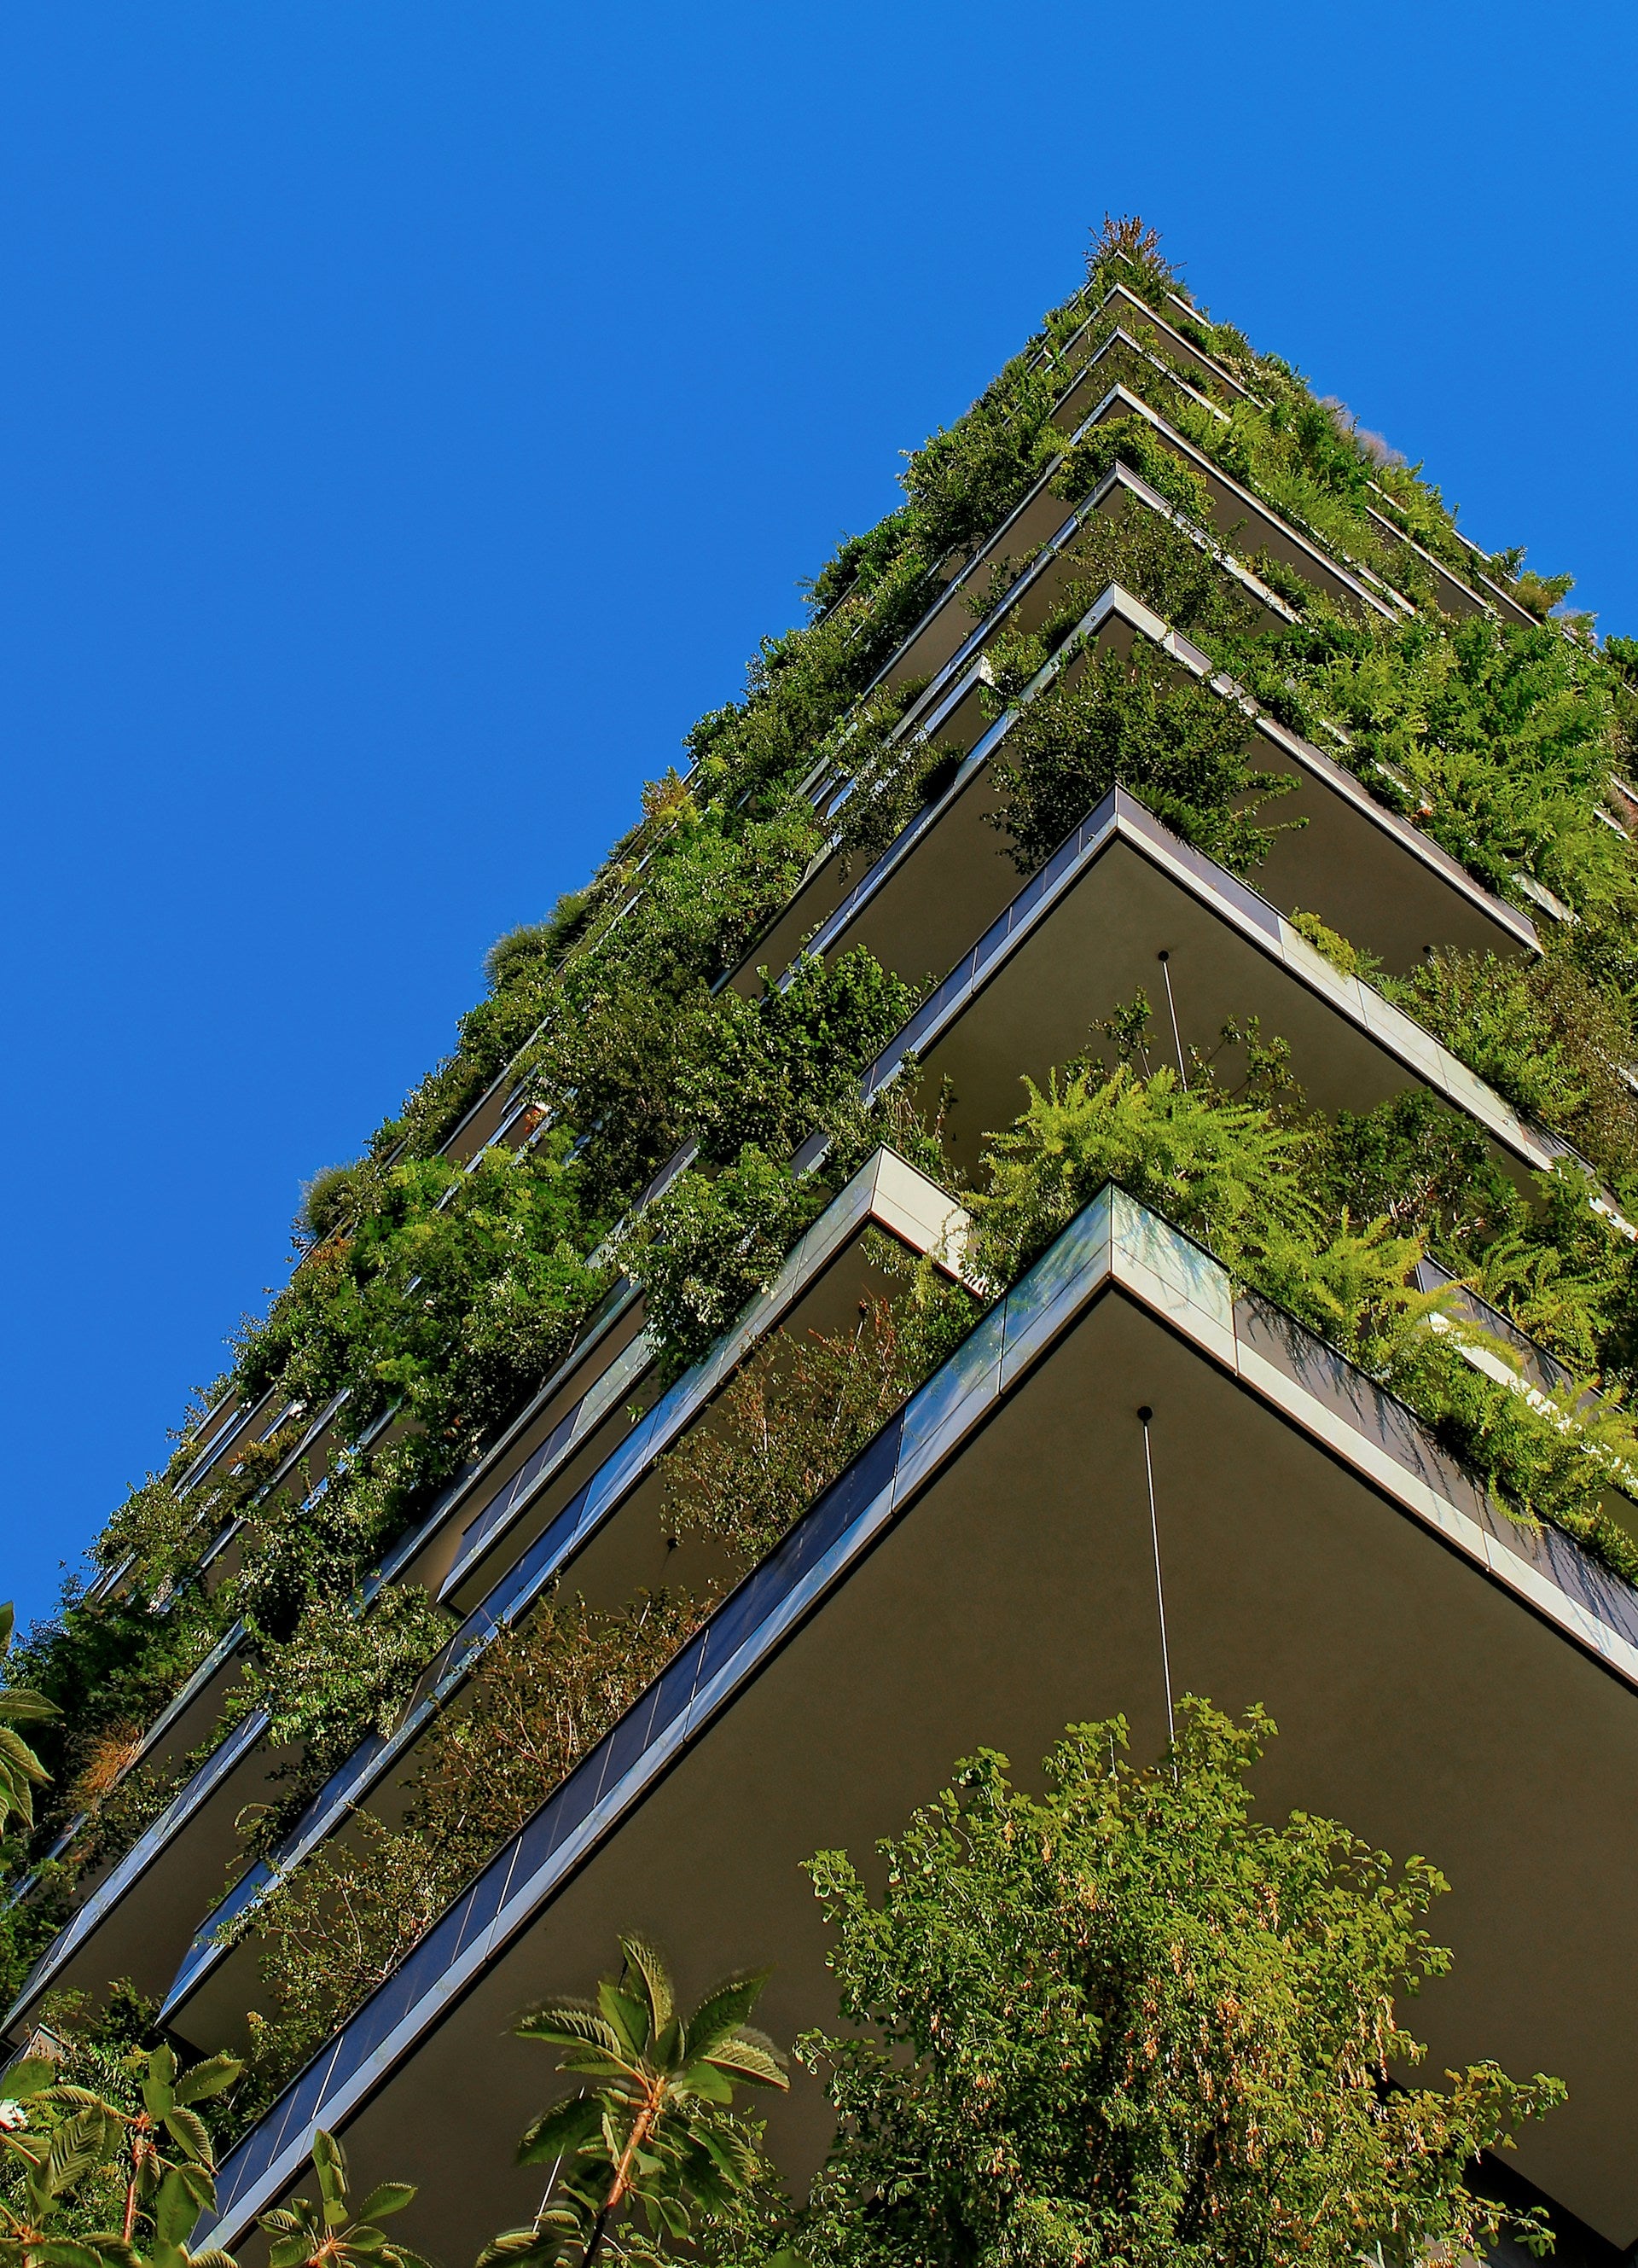 A building covered in greenery in an urban setting with the bright blue sky as the background